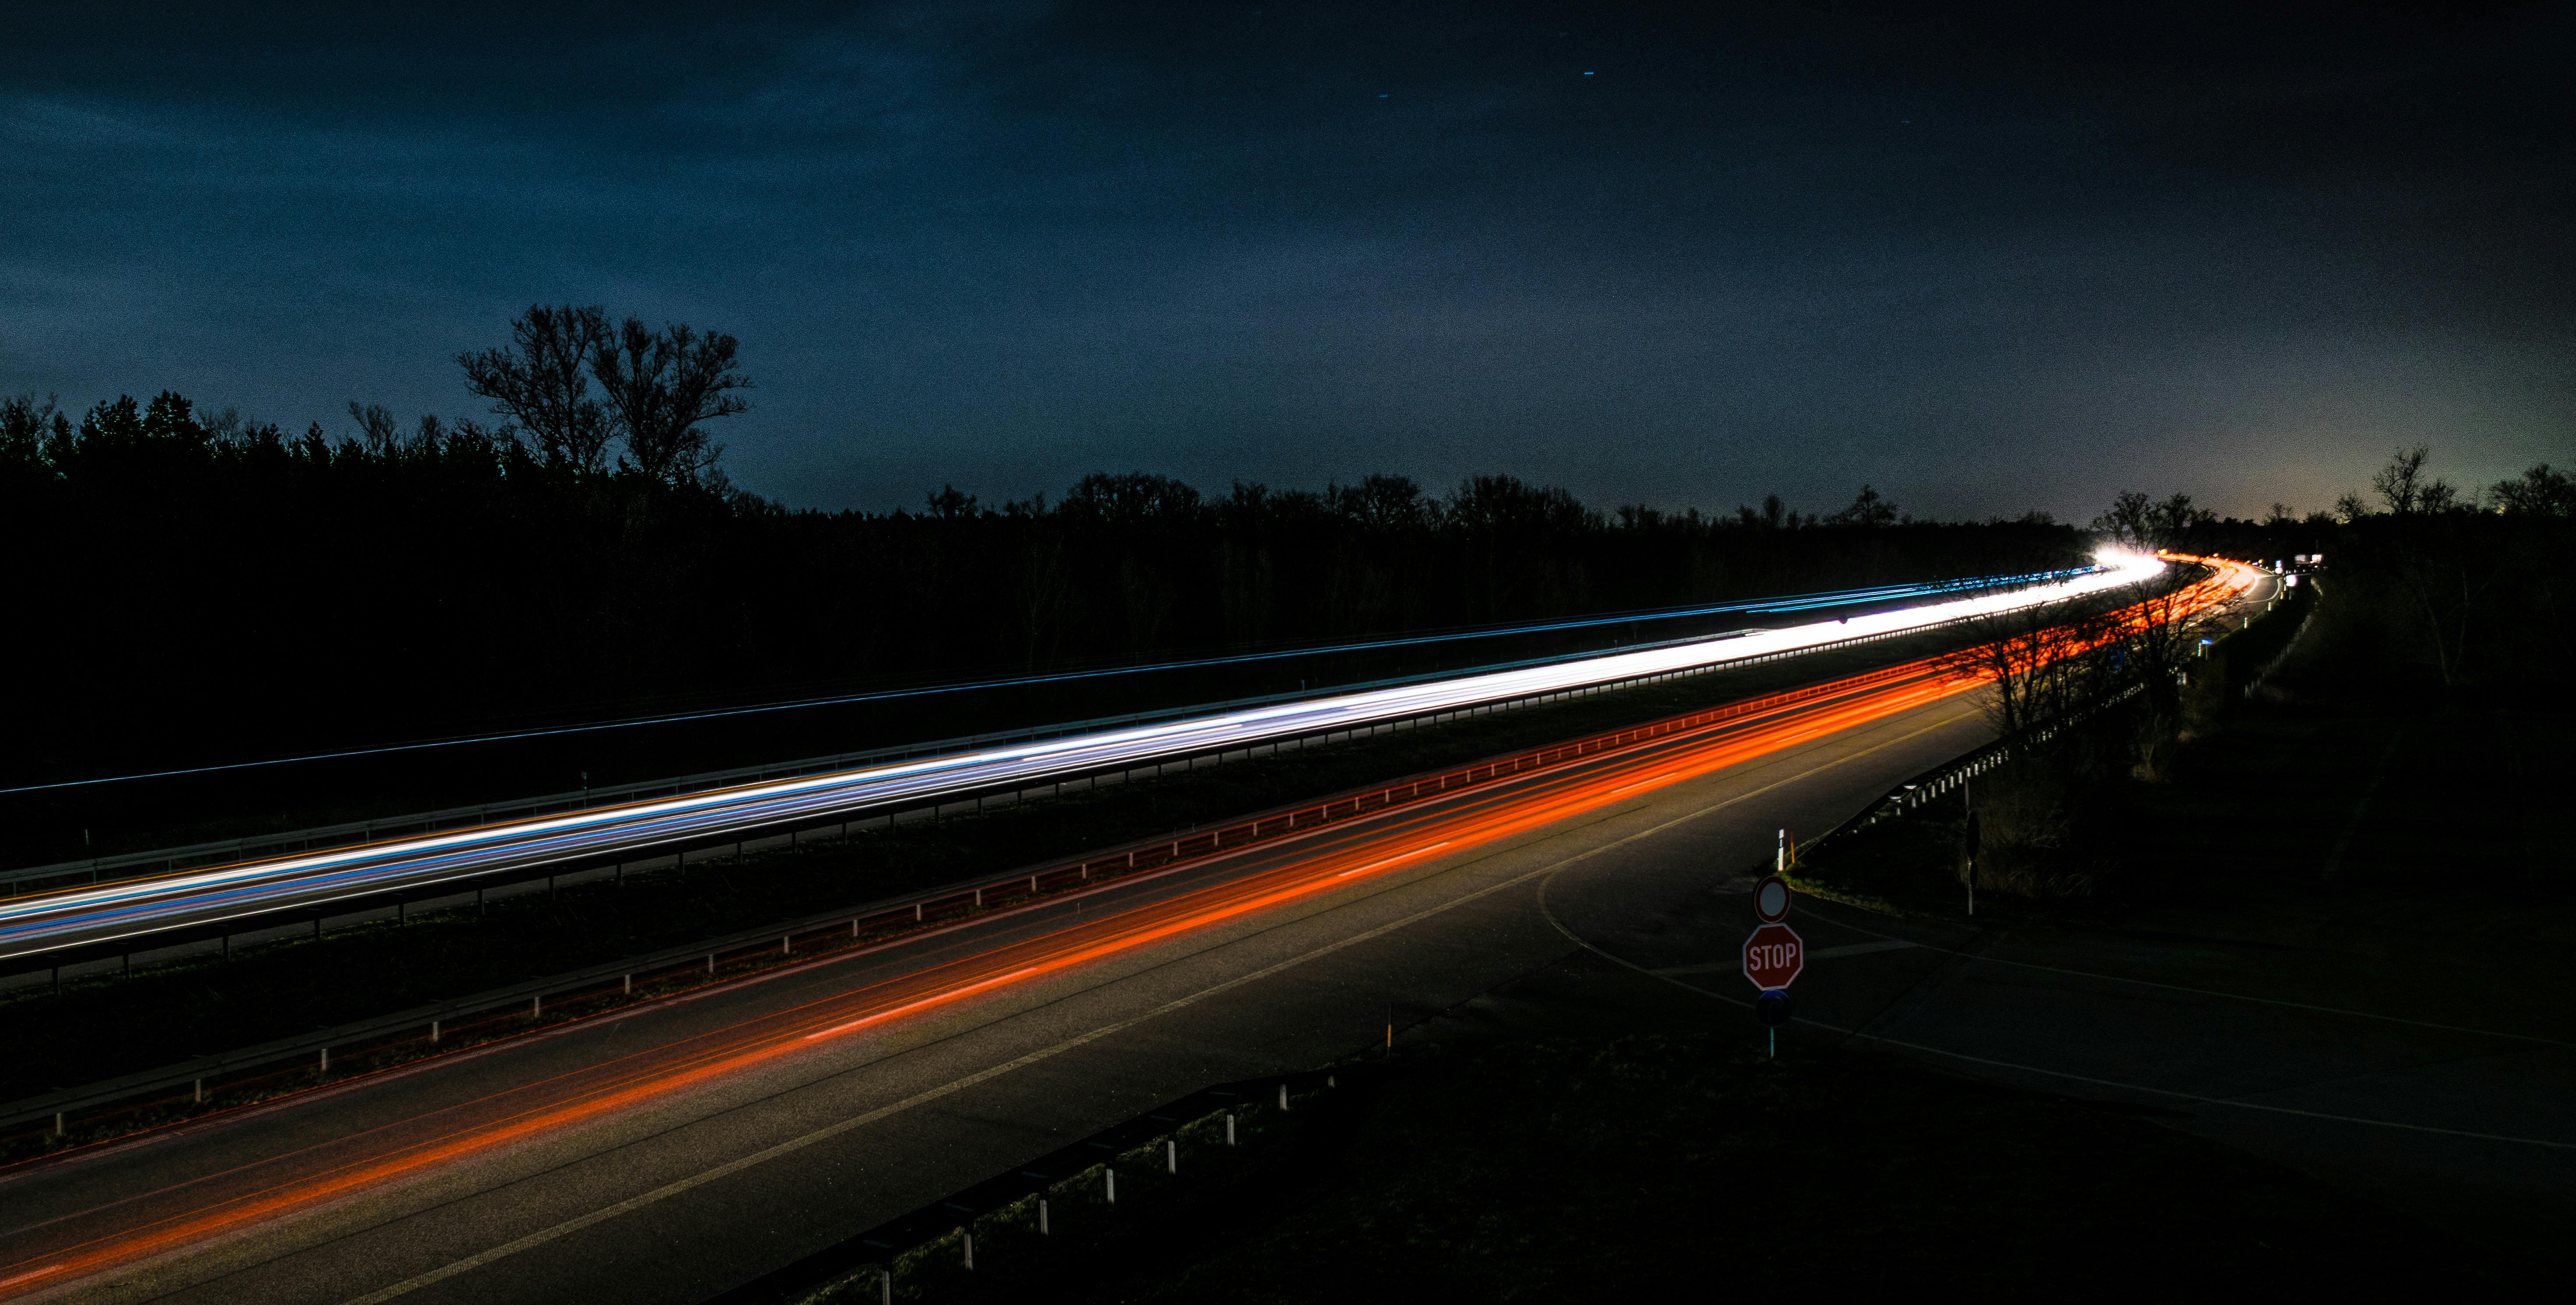 Time-lapse Photography of Red and White Car Lights on Road during Nighttime